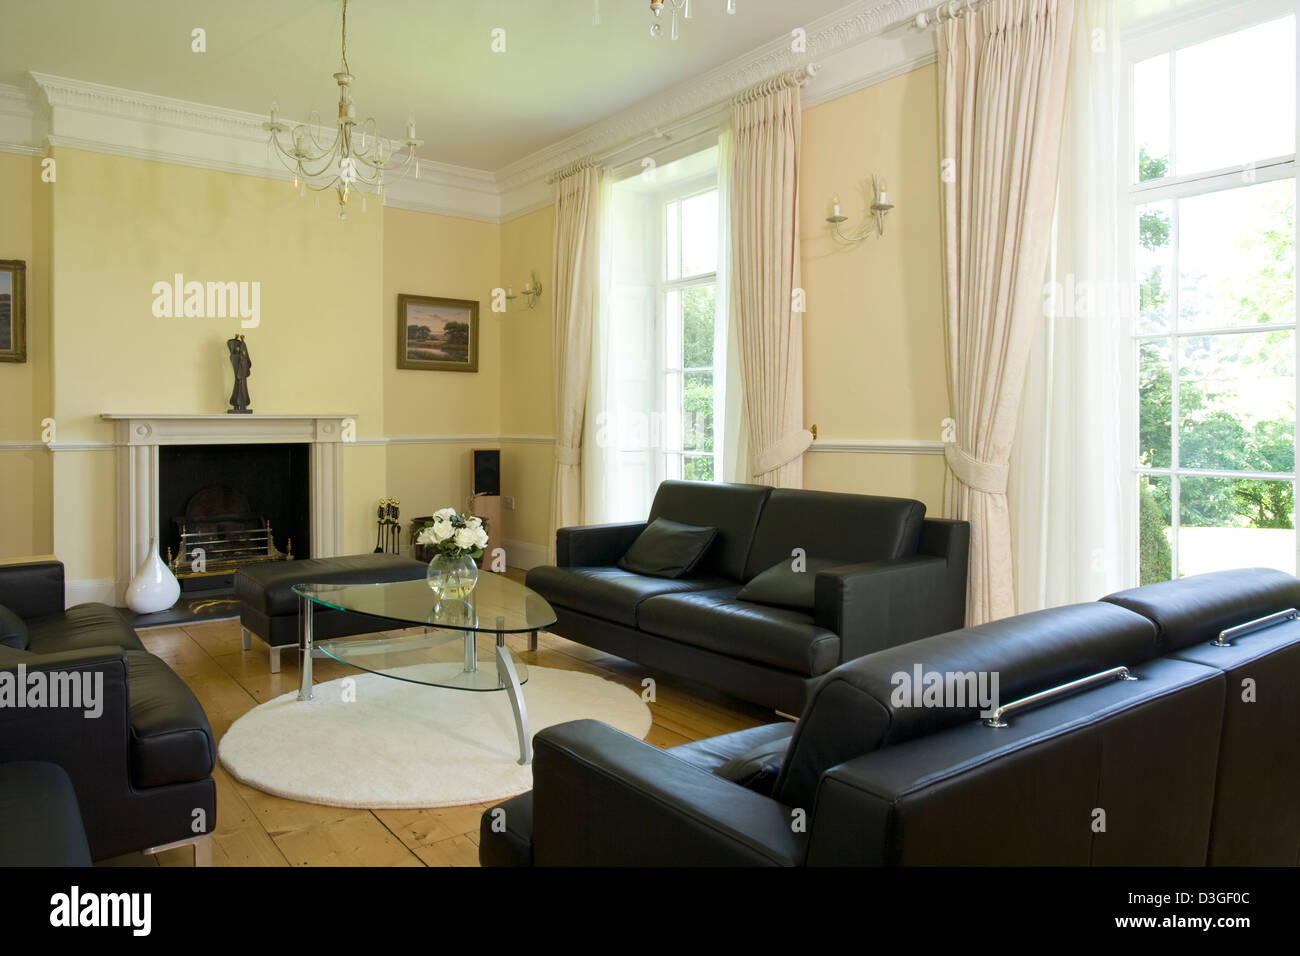 Modern dark leather sofas in an old high ceilinged sash windowed sitting room. Stock Photo